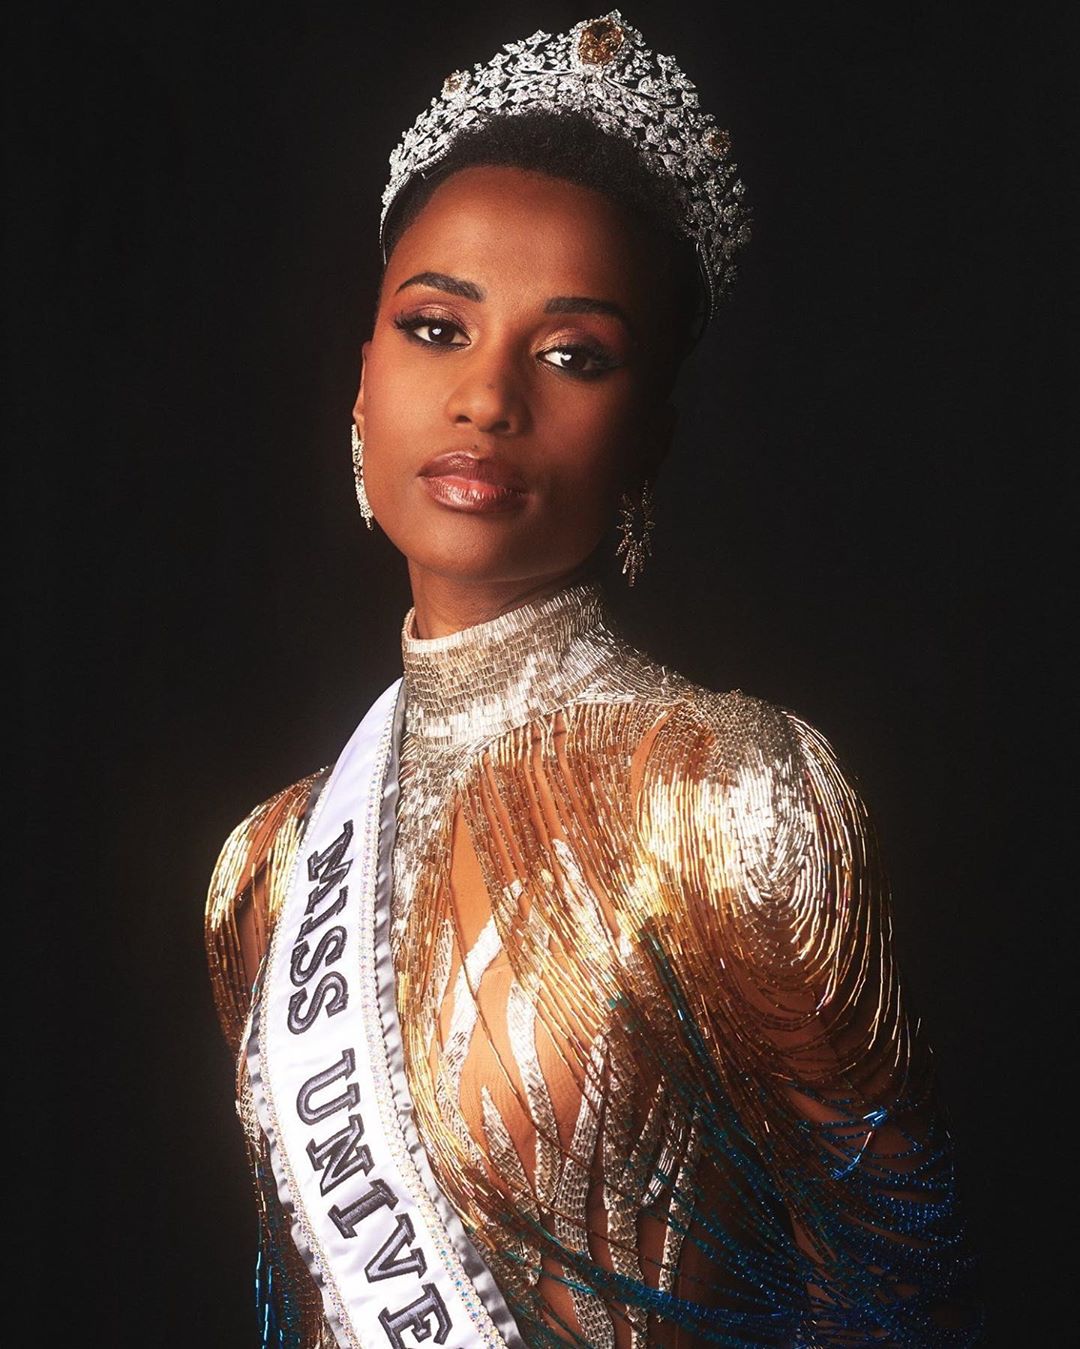 15 Things You Didn't Know About Miss Universe 2019 Zozibini Tunzi